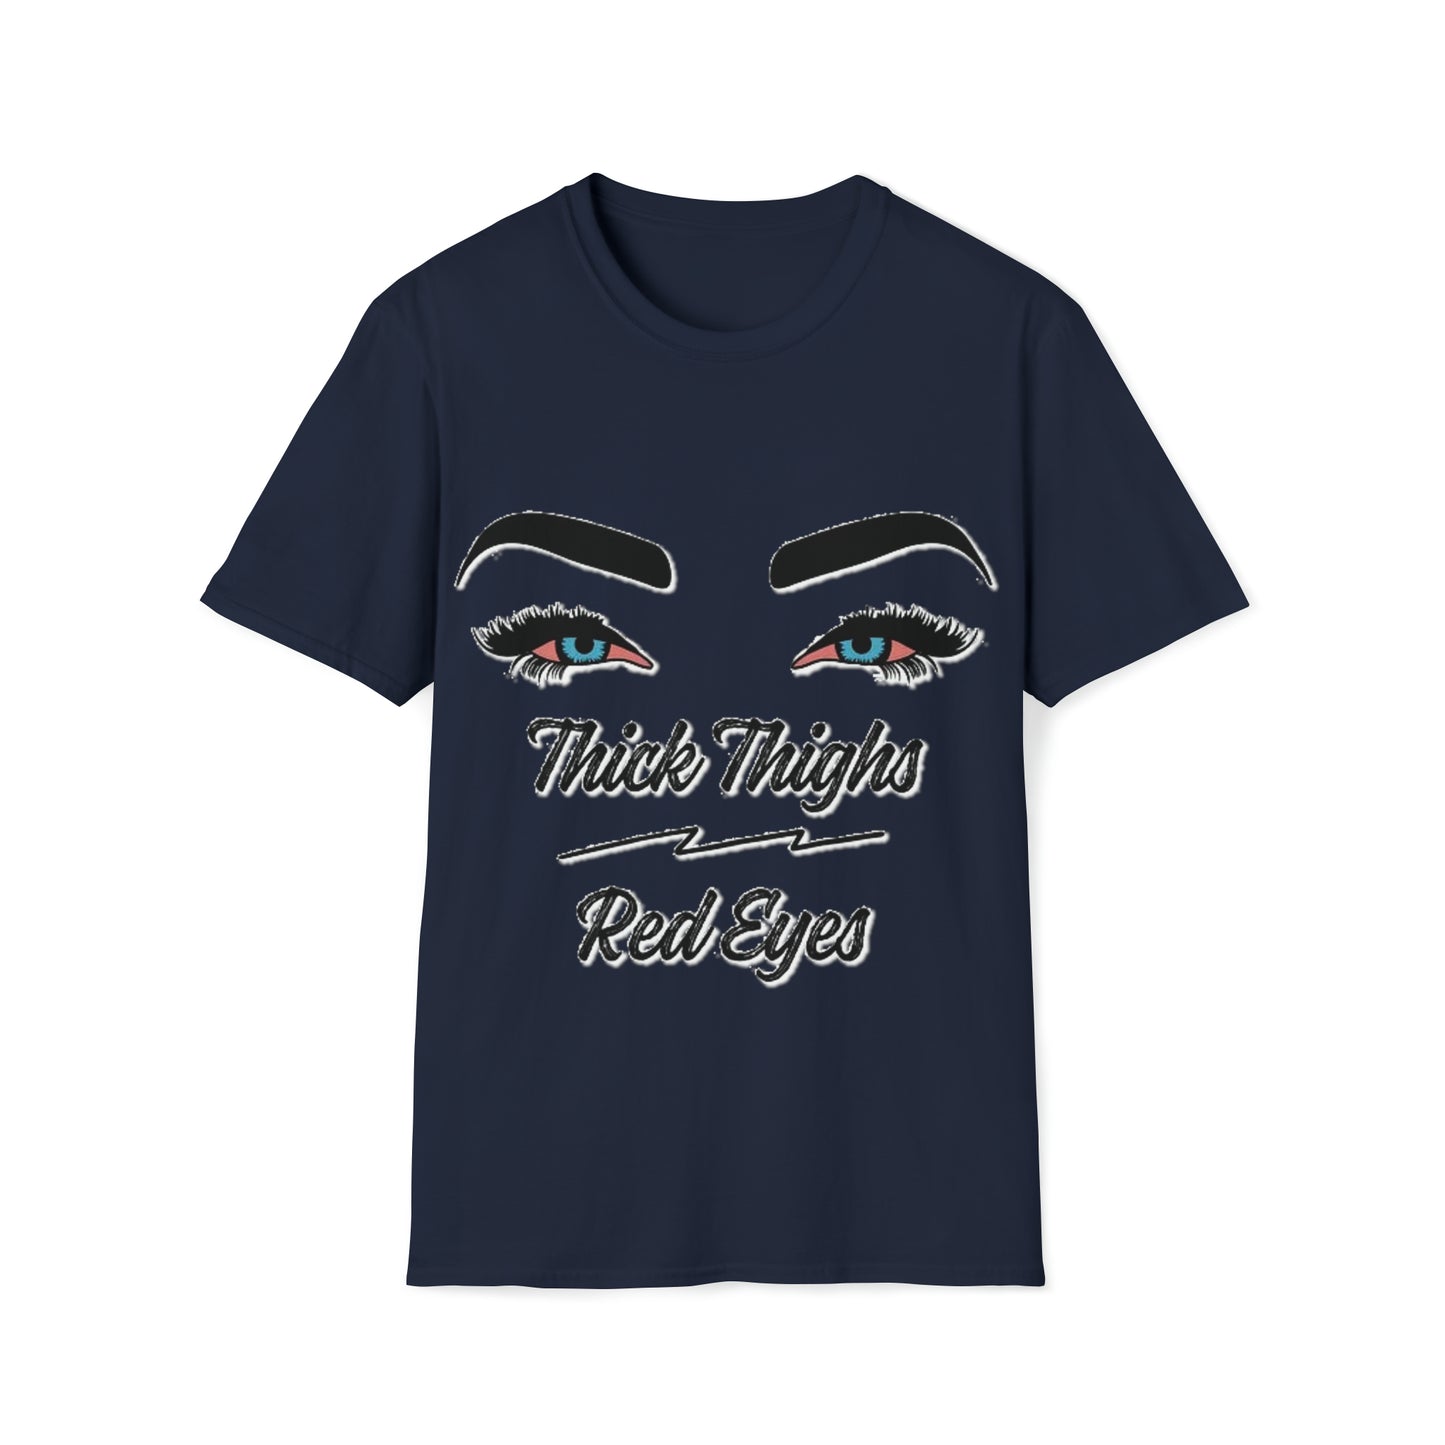 Thick Thighs Red Eyes Tee